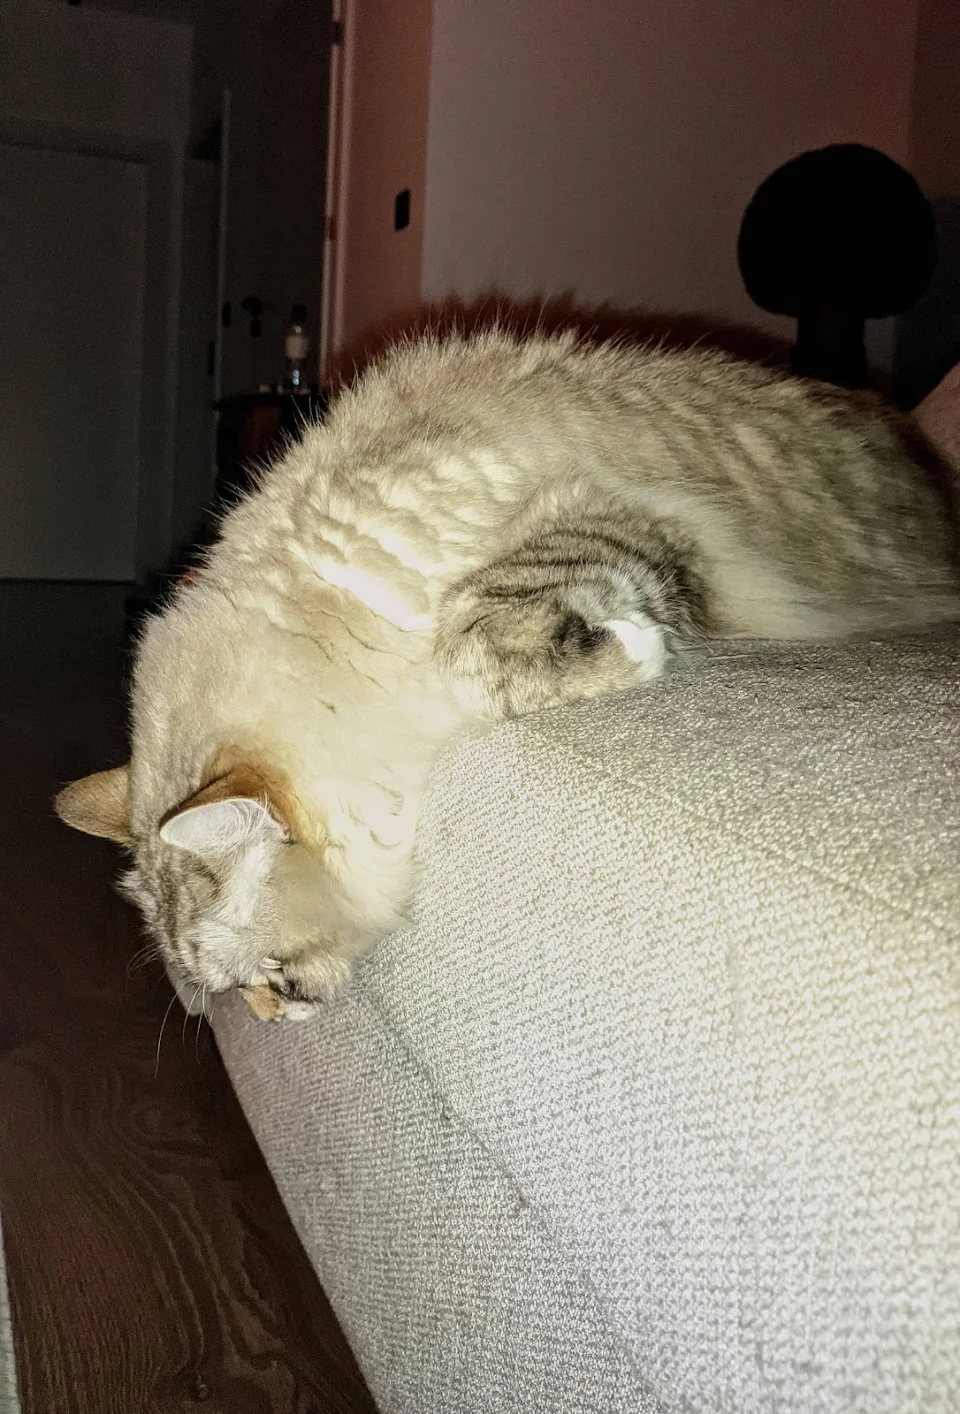 This is how my friend's cat likes to sleep.